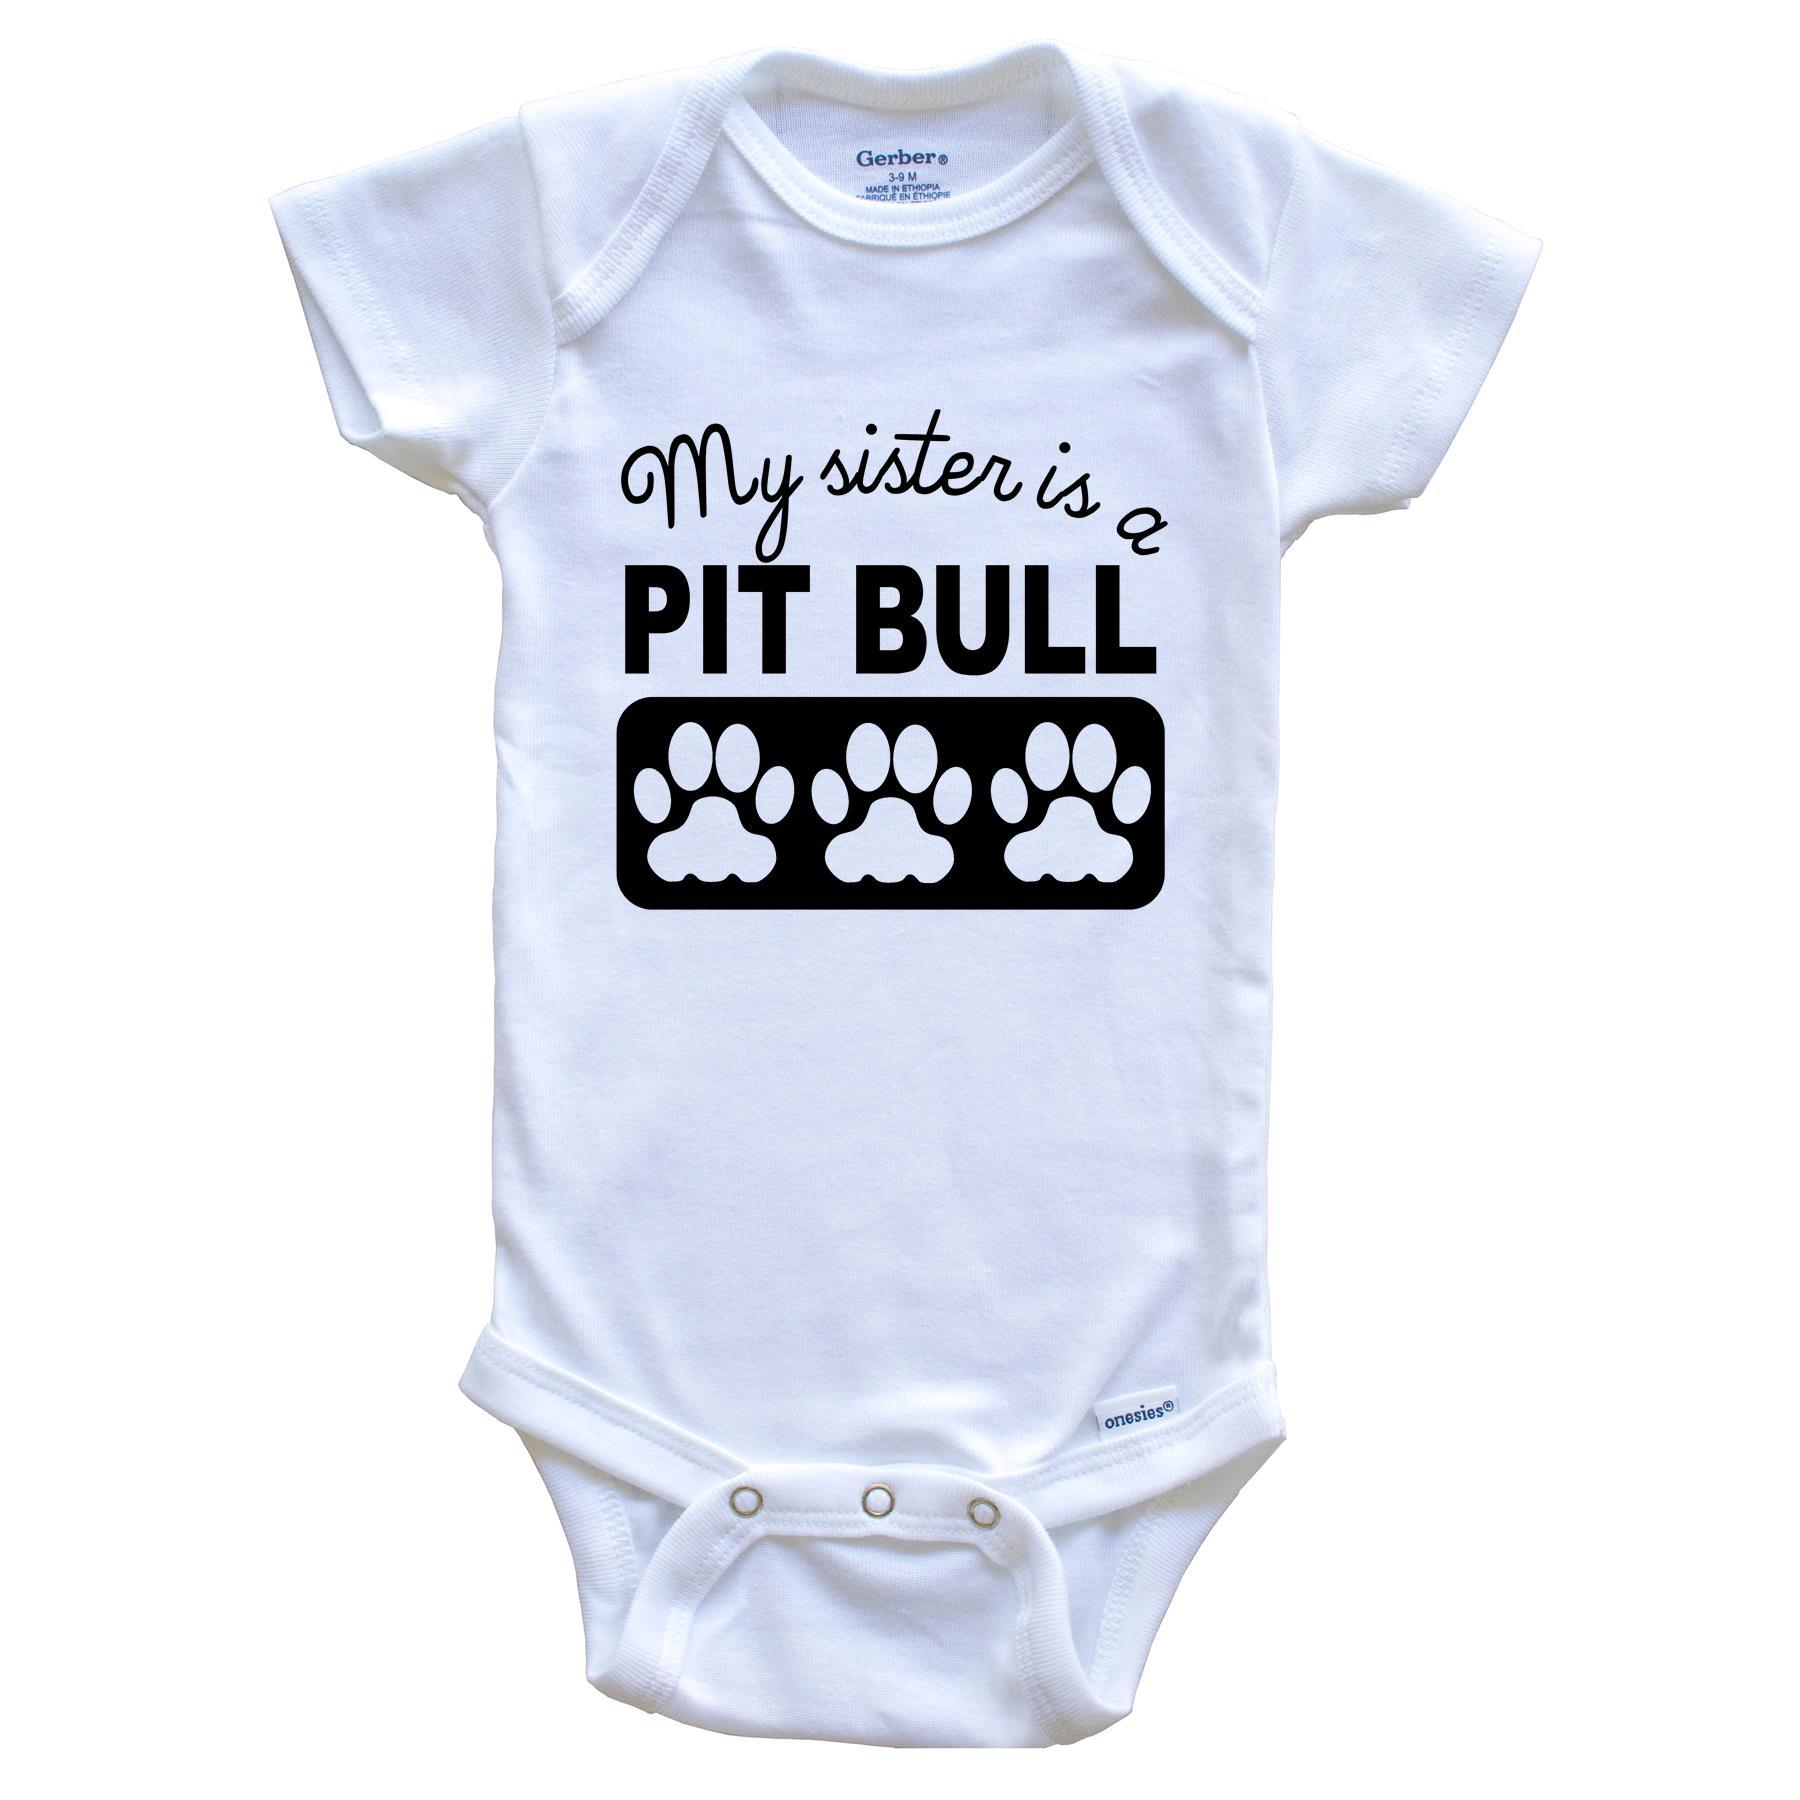 My Sister Is A Pit Bull Baby Onesie